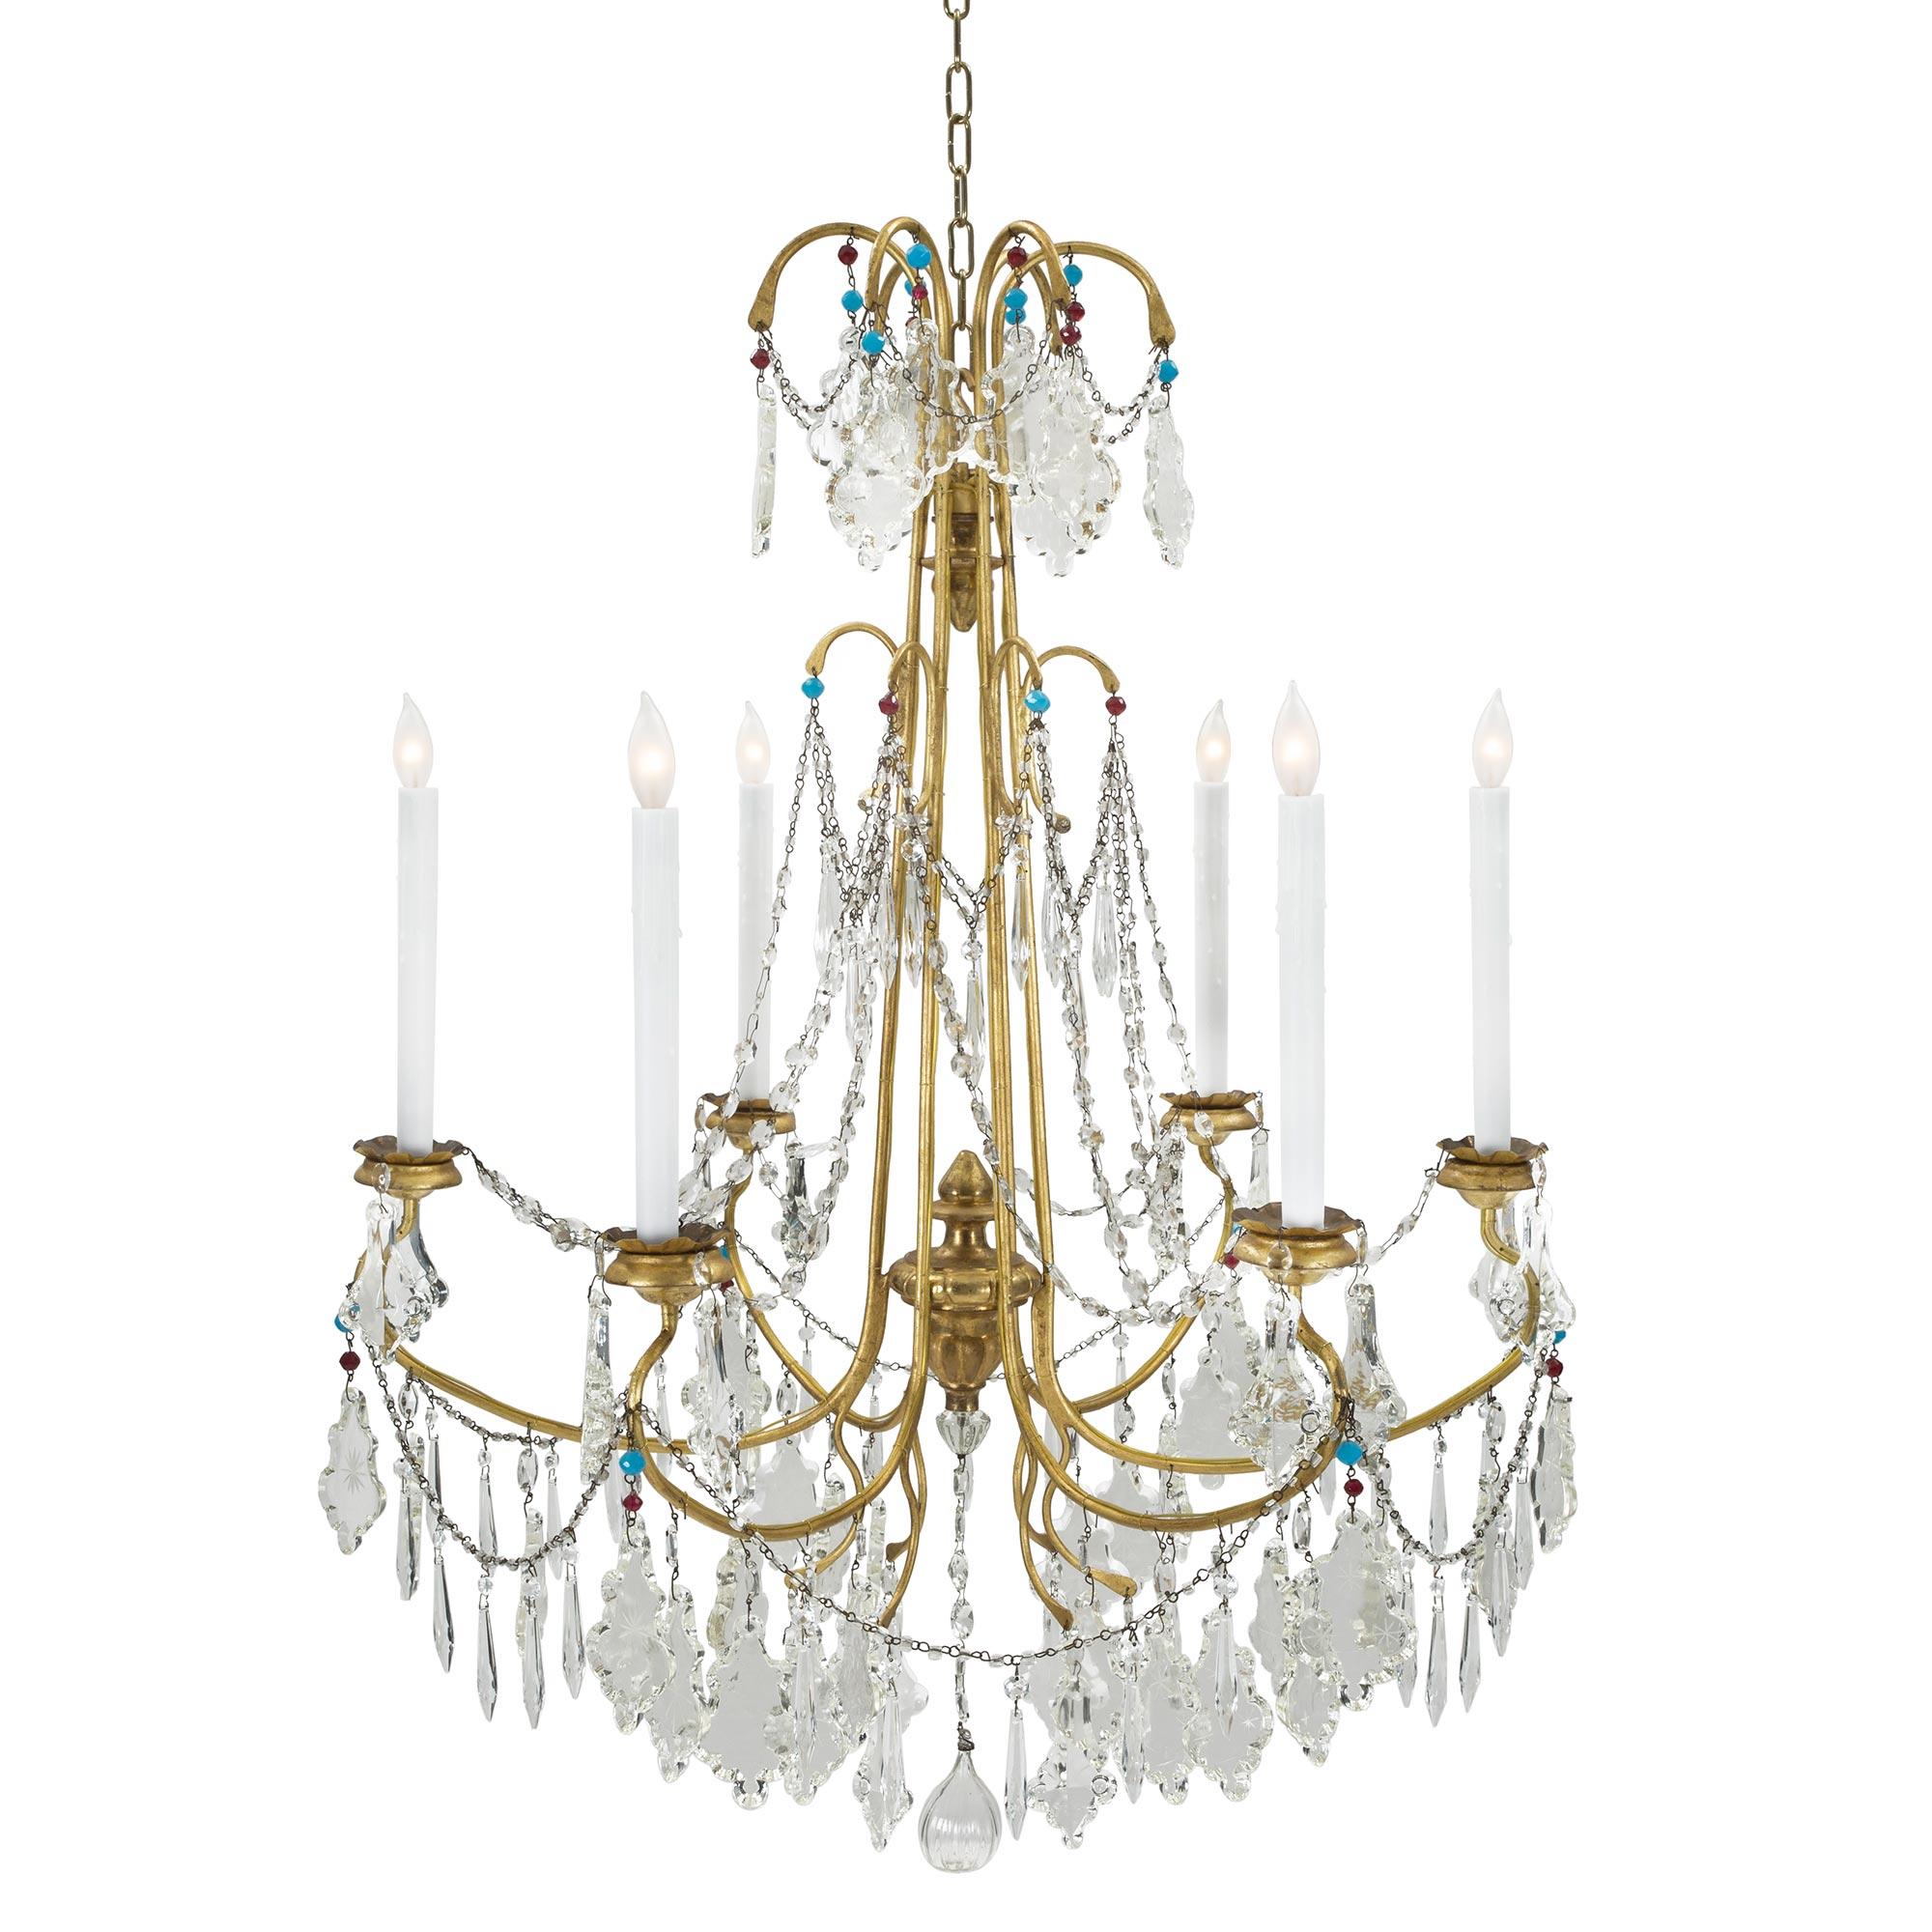 A most elegant and charming Italian 19th century six light gilt metal, giltwood and crystal Genovese chandelier. The chandelier is centered by a fine and wonderfully executed hand blown fig shaped pendant surrounded by a beautiful array of crystal